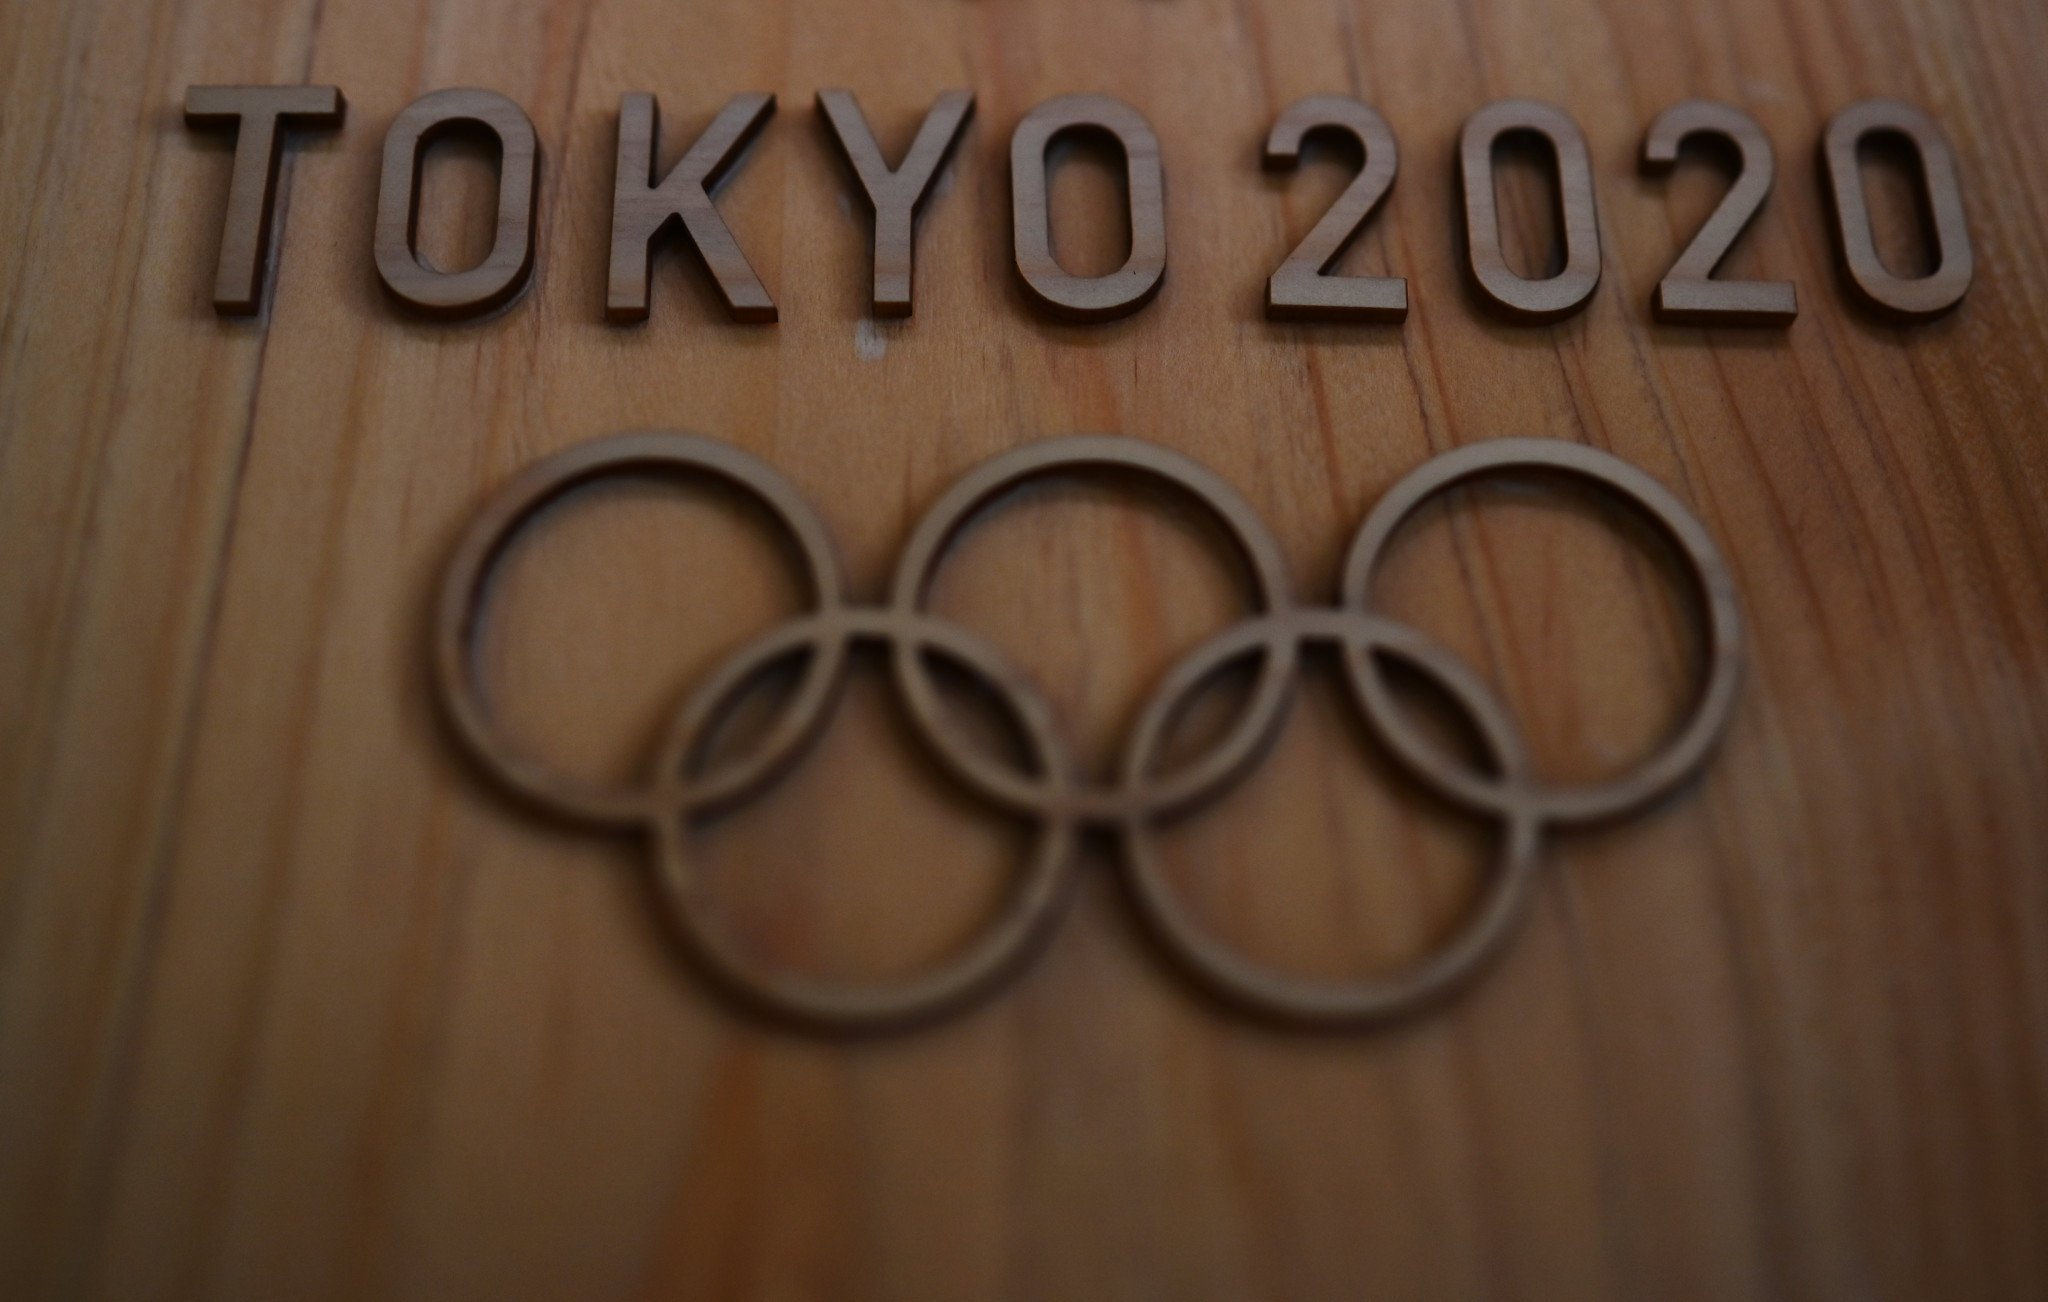 New dates have been confirmed for the Tokyo 2020 Olympics following their postponement to 2021 ©Getty Images